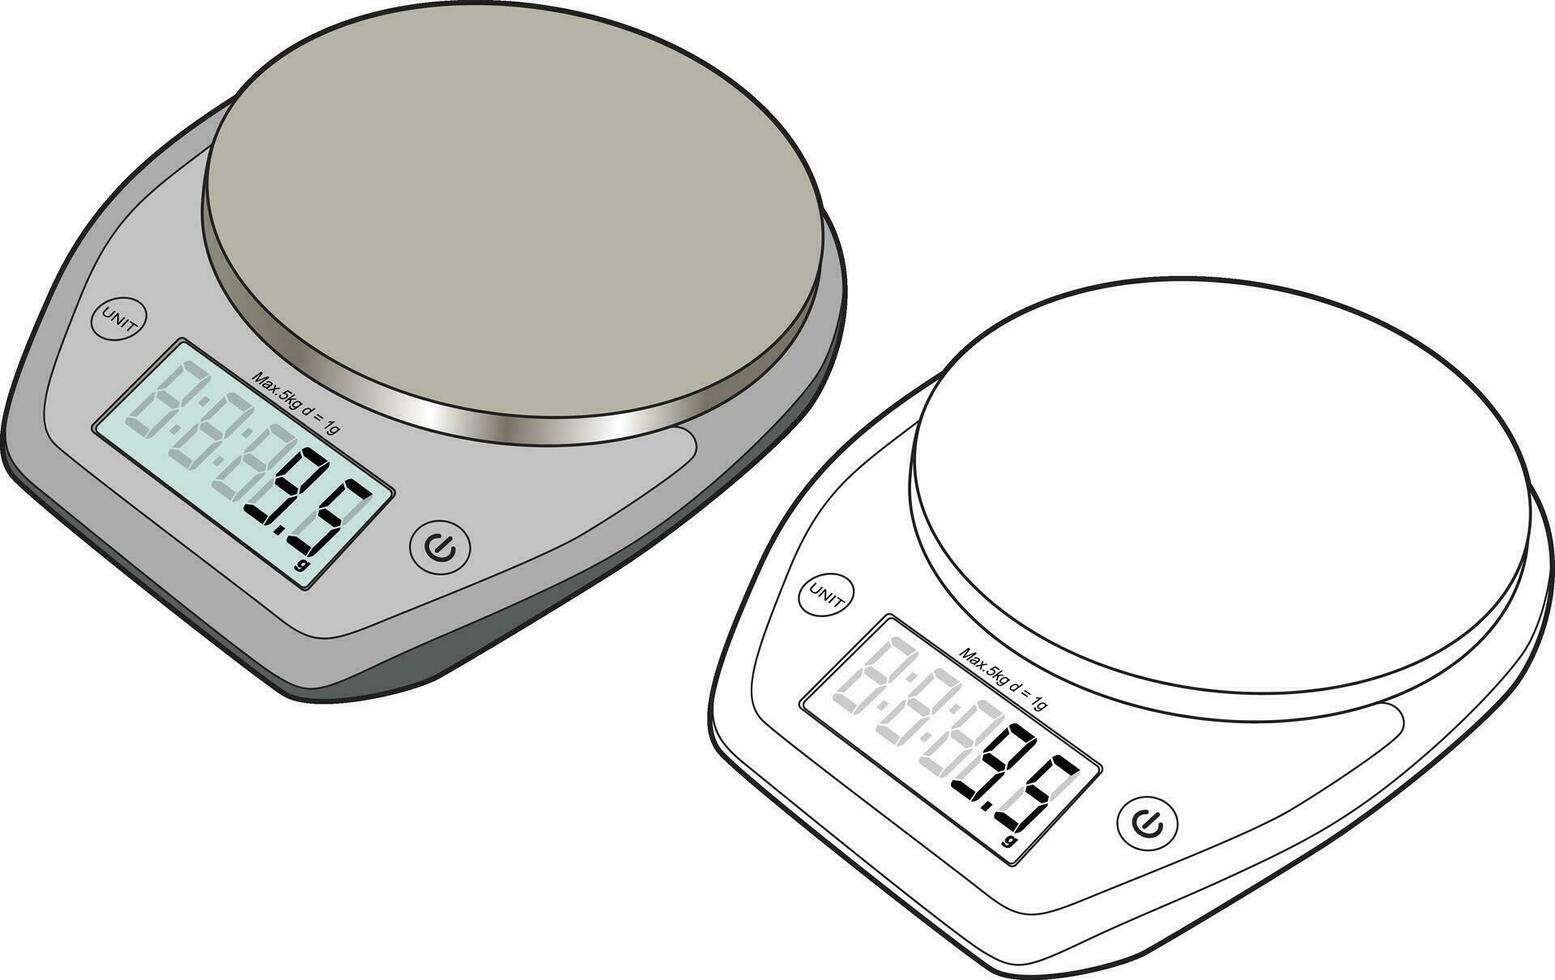 How To Use A Digital Kitchen Scale For Baking